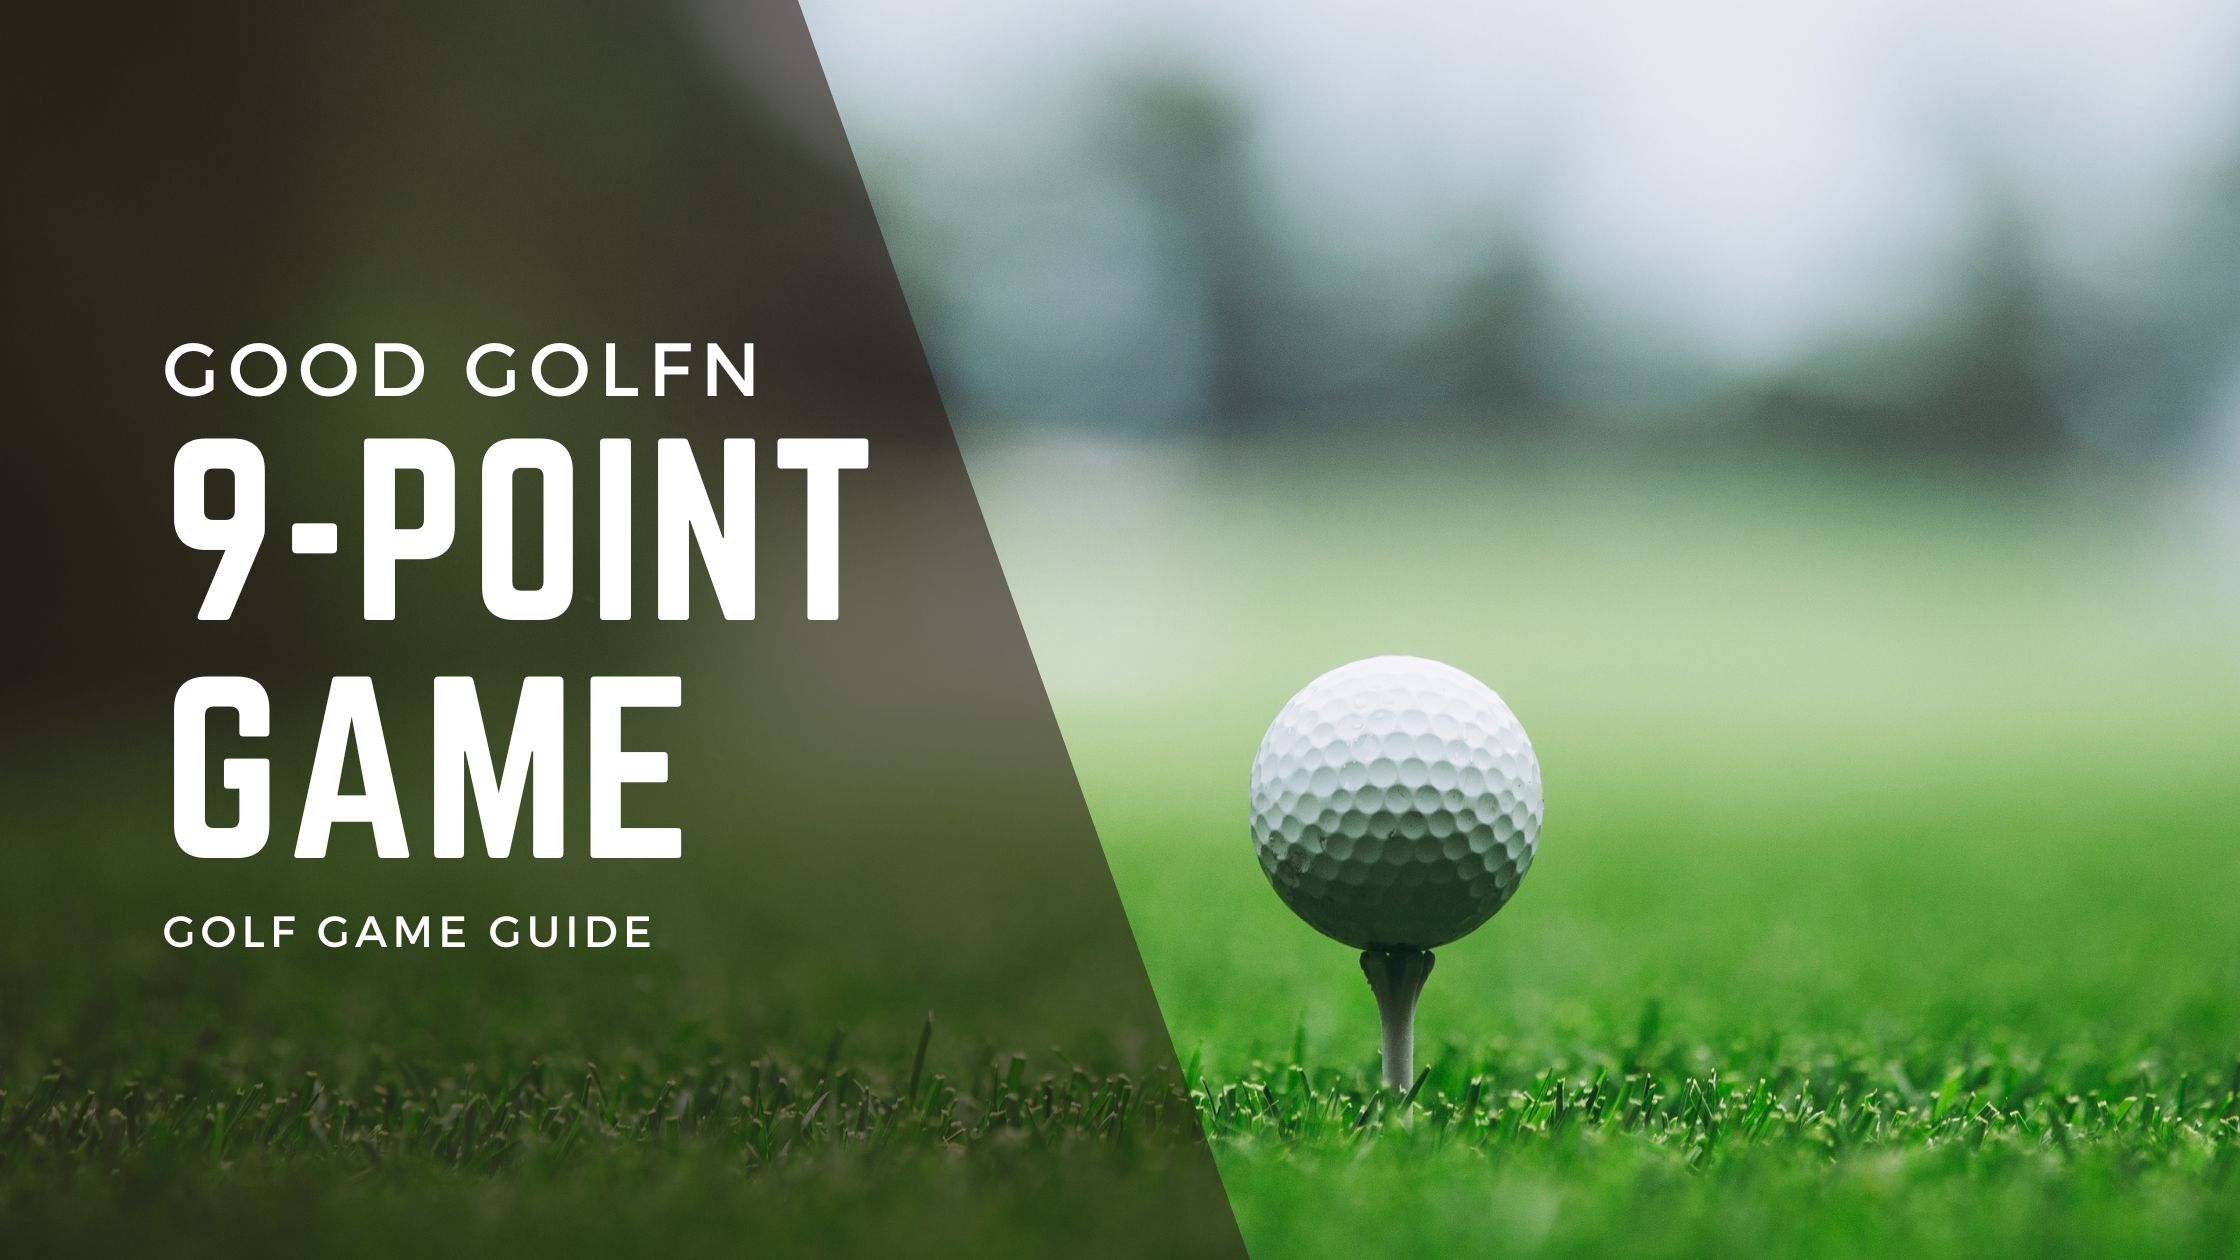 Dive into the 9-point golf game, unravel its scoring intricacies, and discover engaging formats for group play.